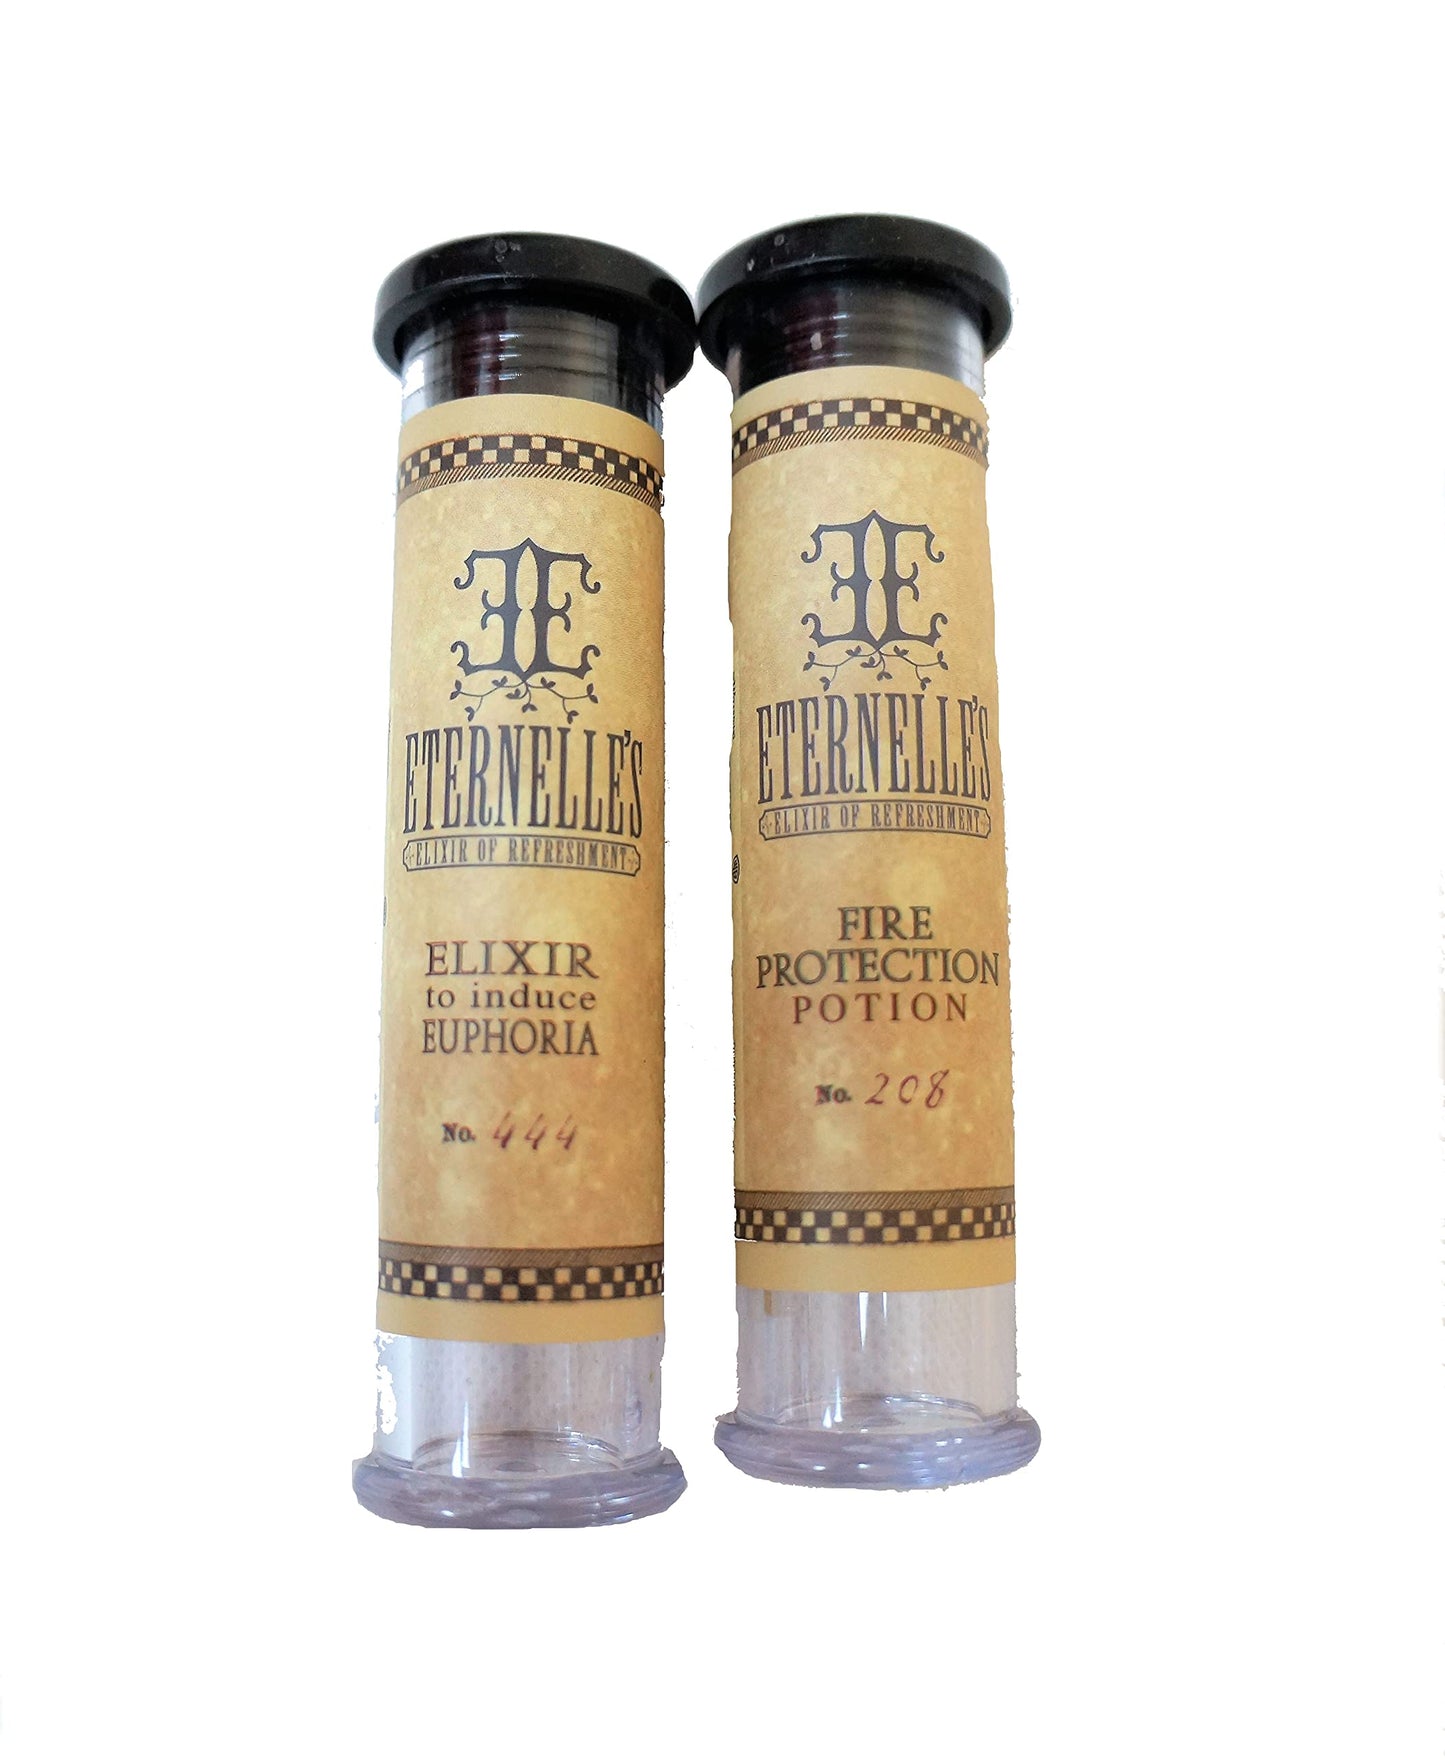 The Wizarding World Of Harry Potter 2 x Empty Potion Bottles - Elixir To Induce Euphoria & Fire Protection Potion - Fantastic Condition